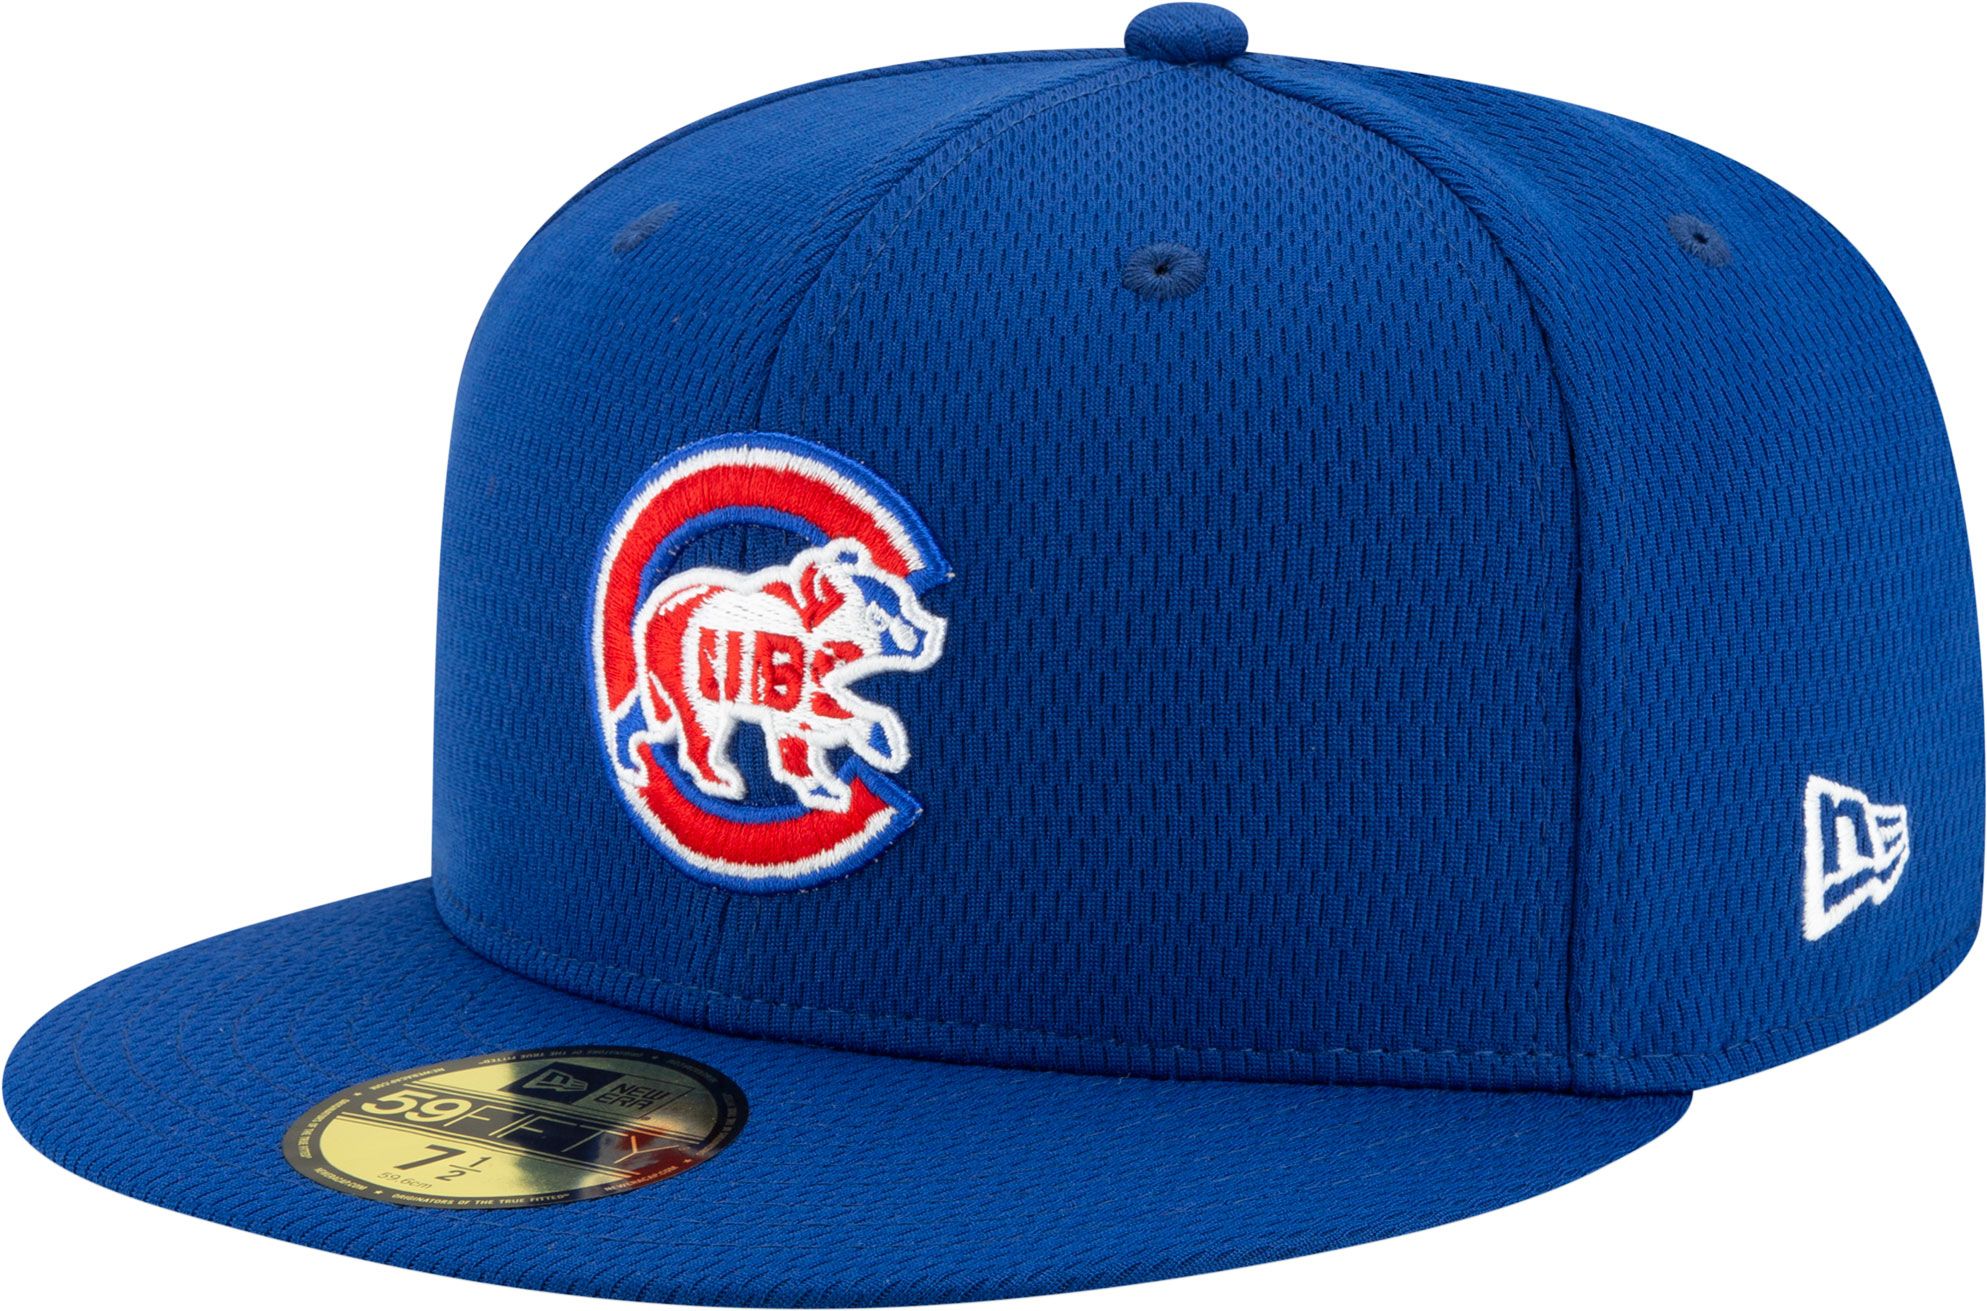 2020 cubs spring training hat